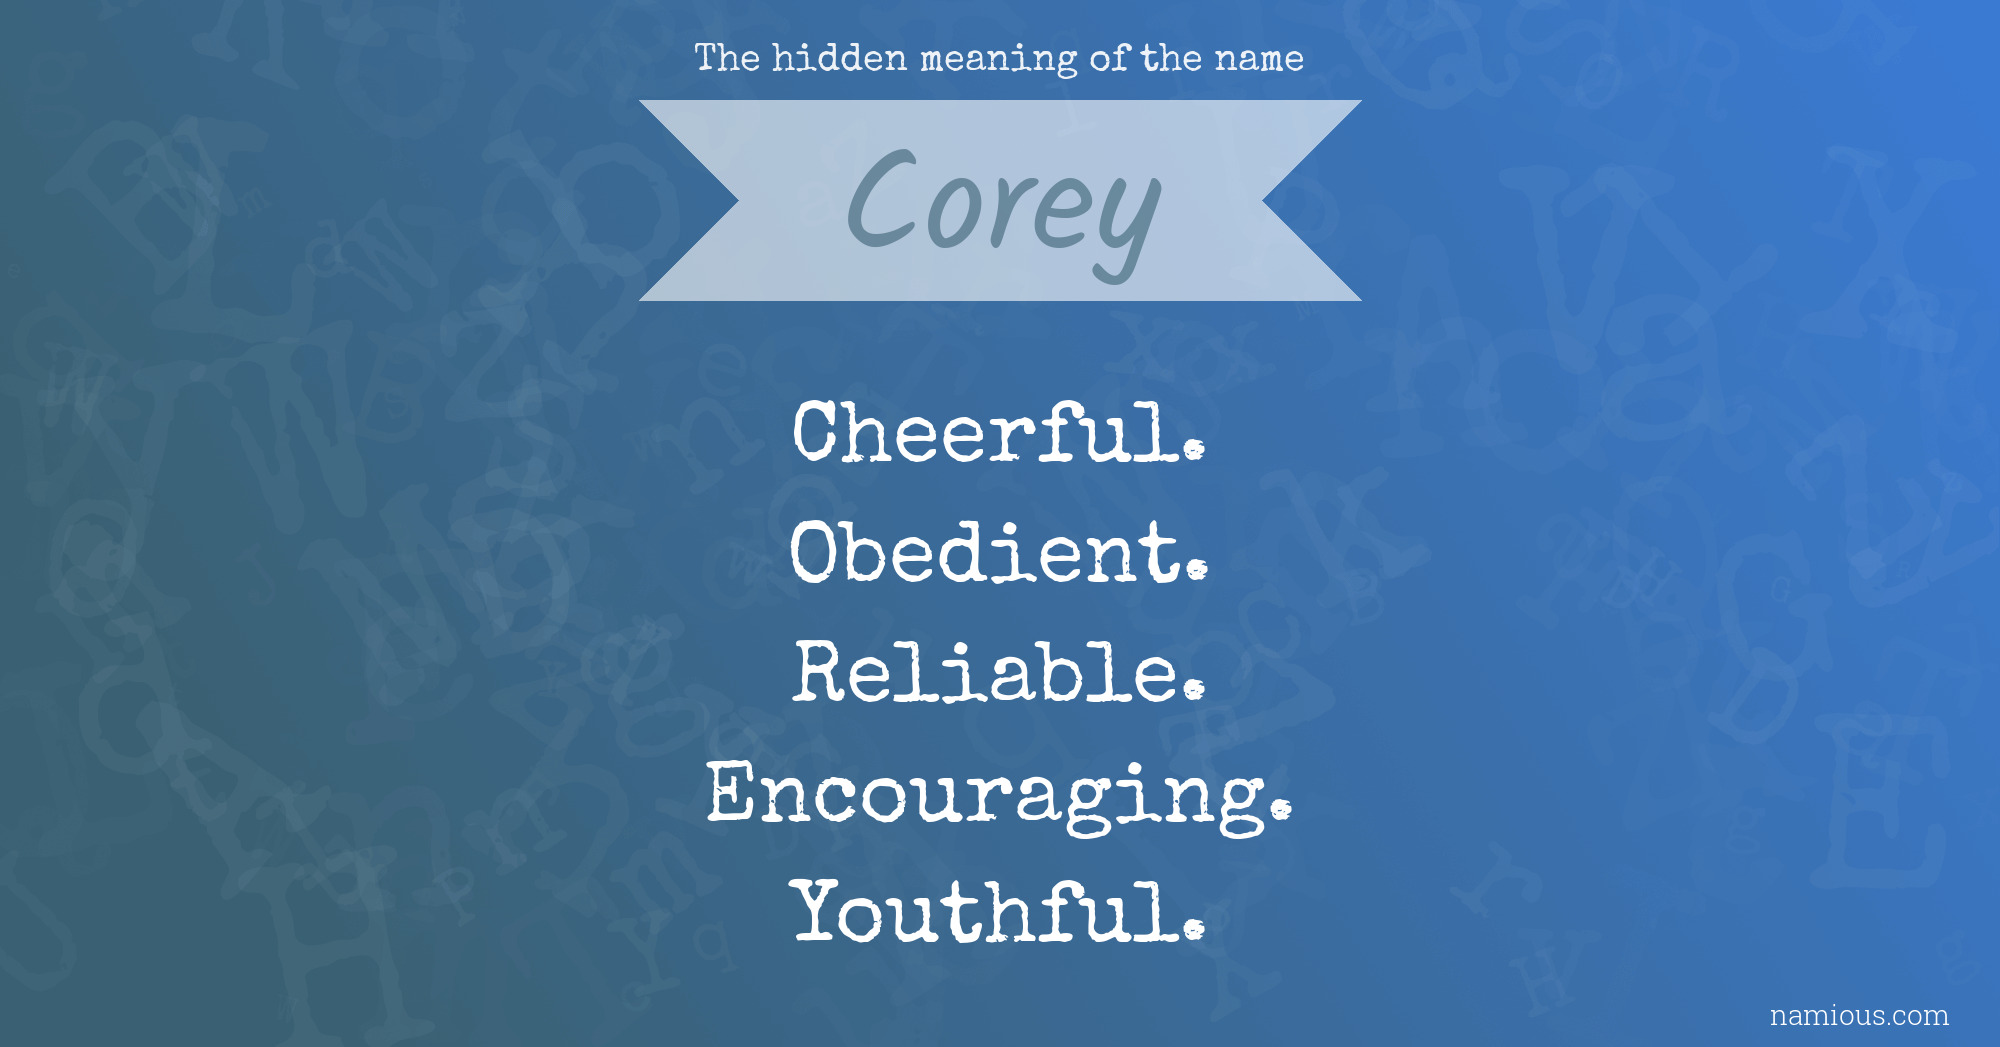 The hidden meaning of the name Corey